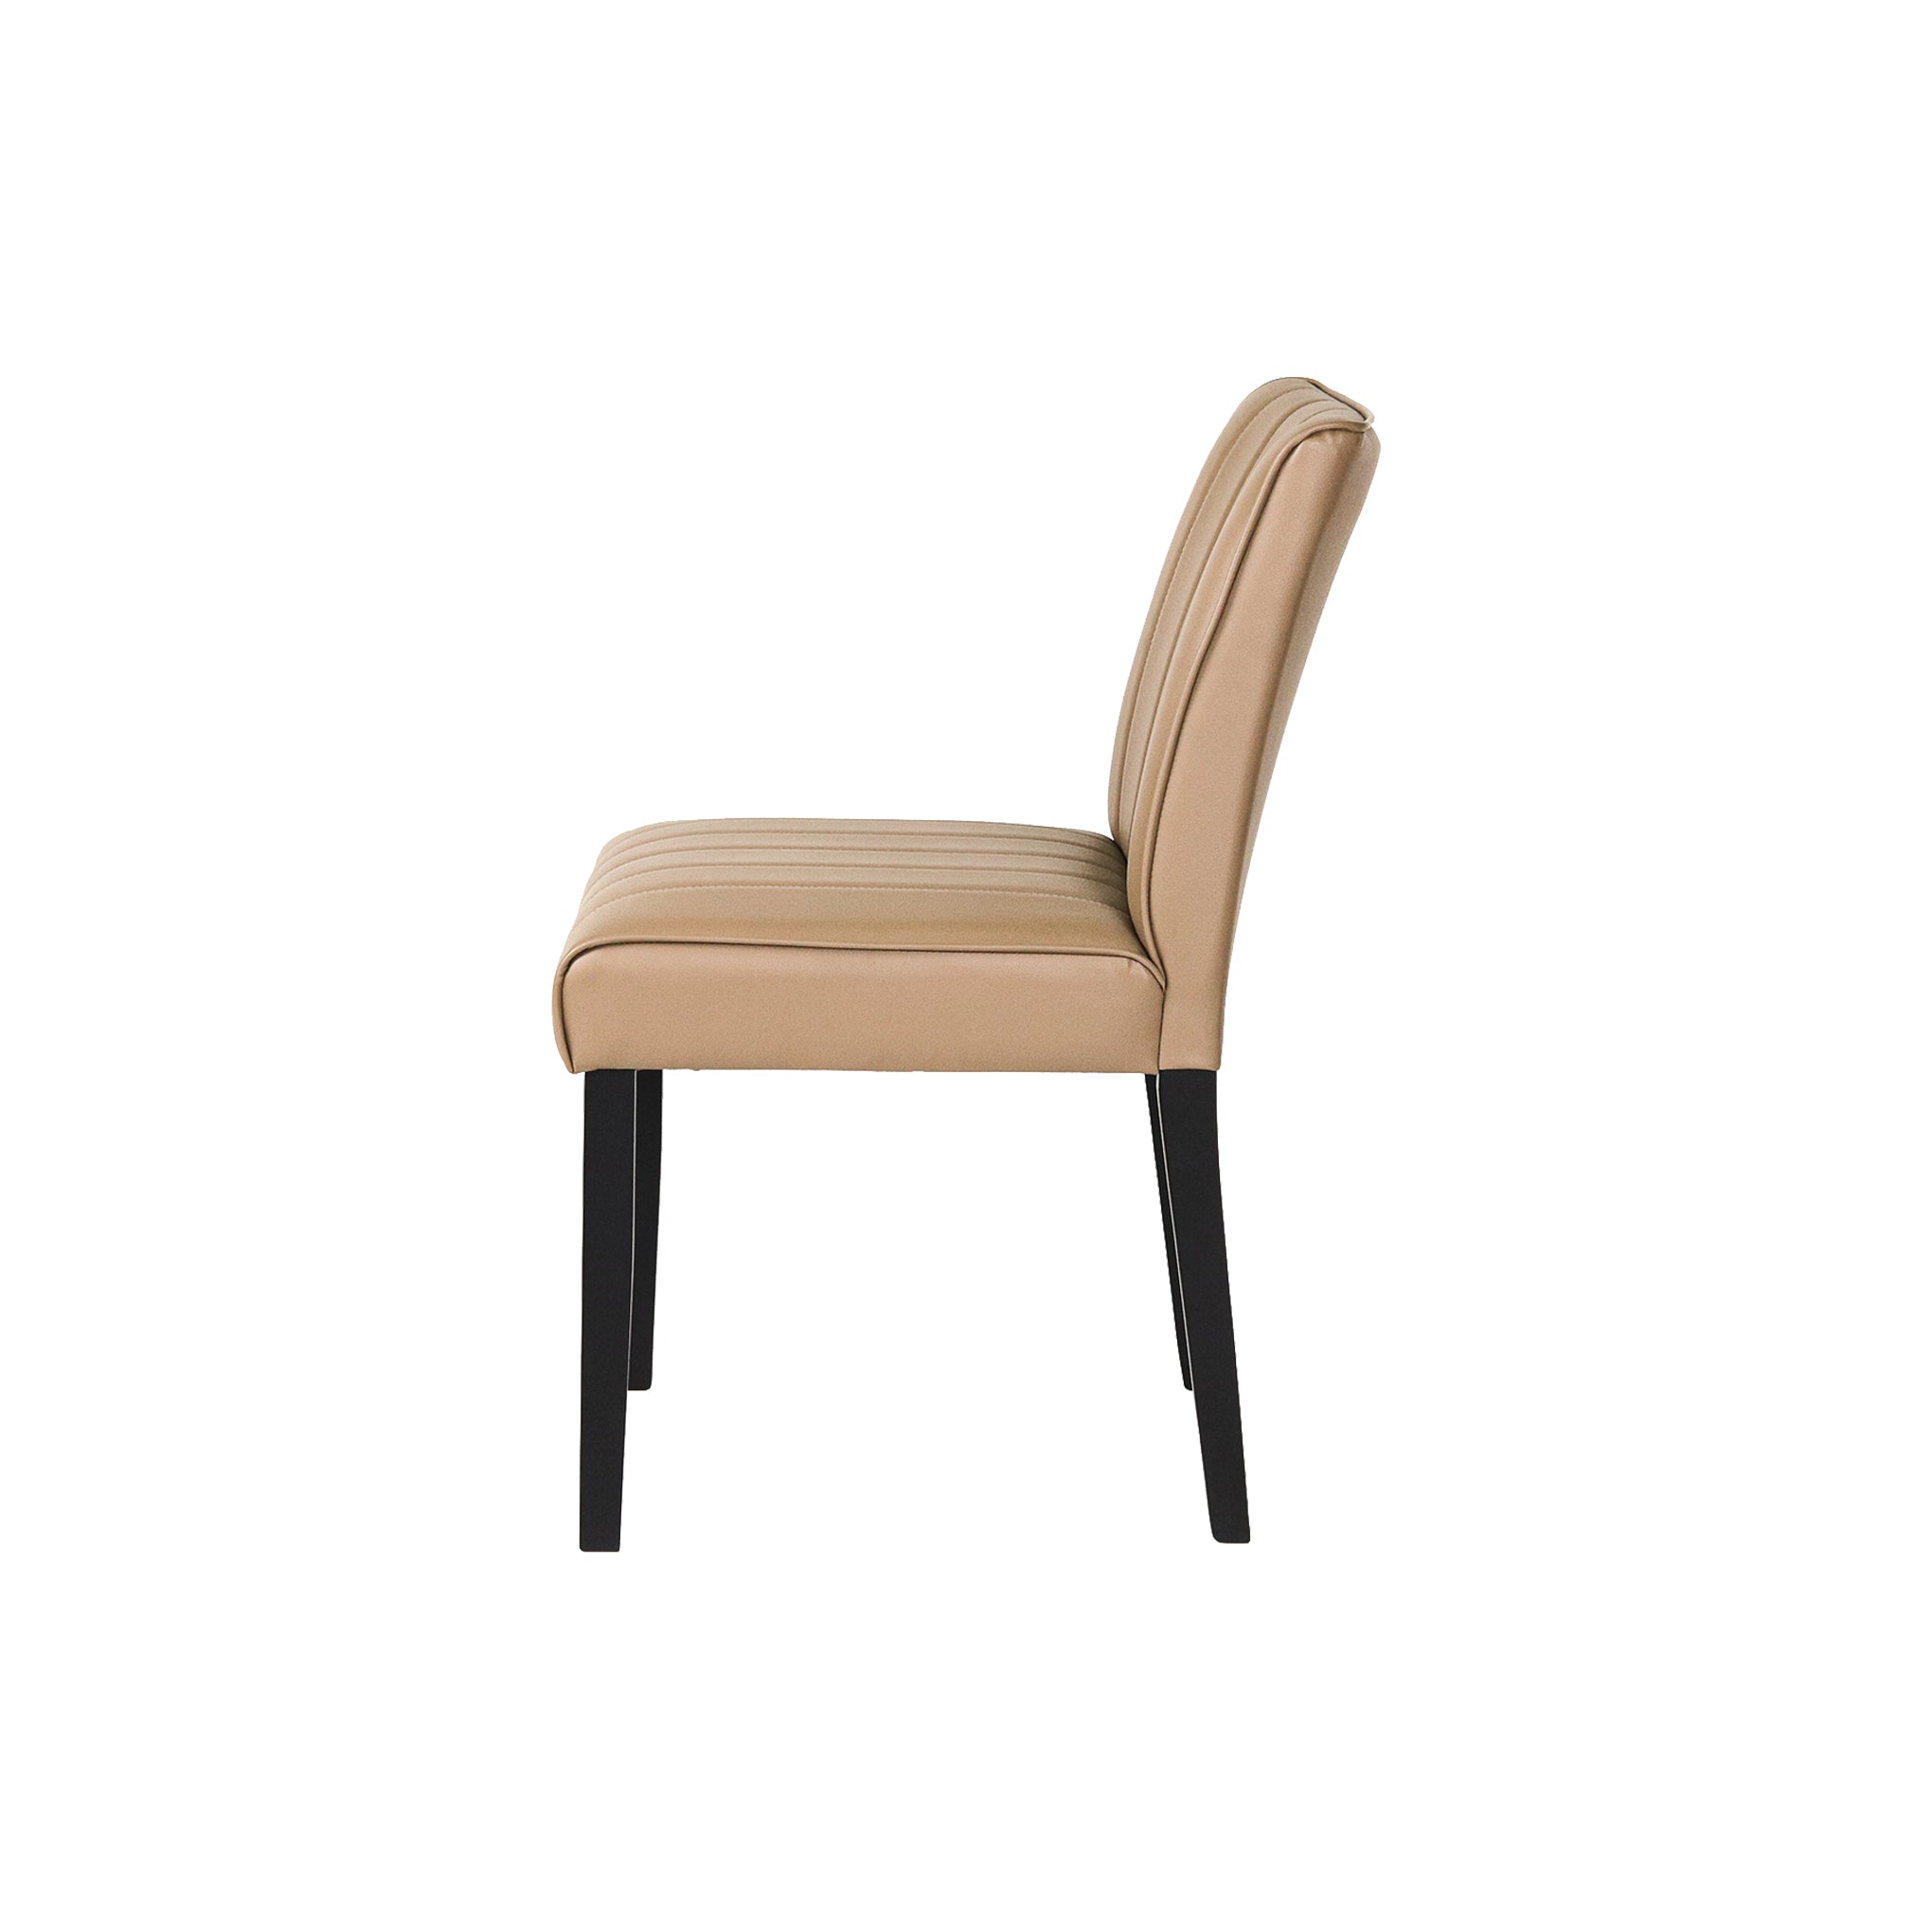 Melachi Wooden Dining Chair with PVC Seat